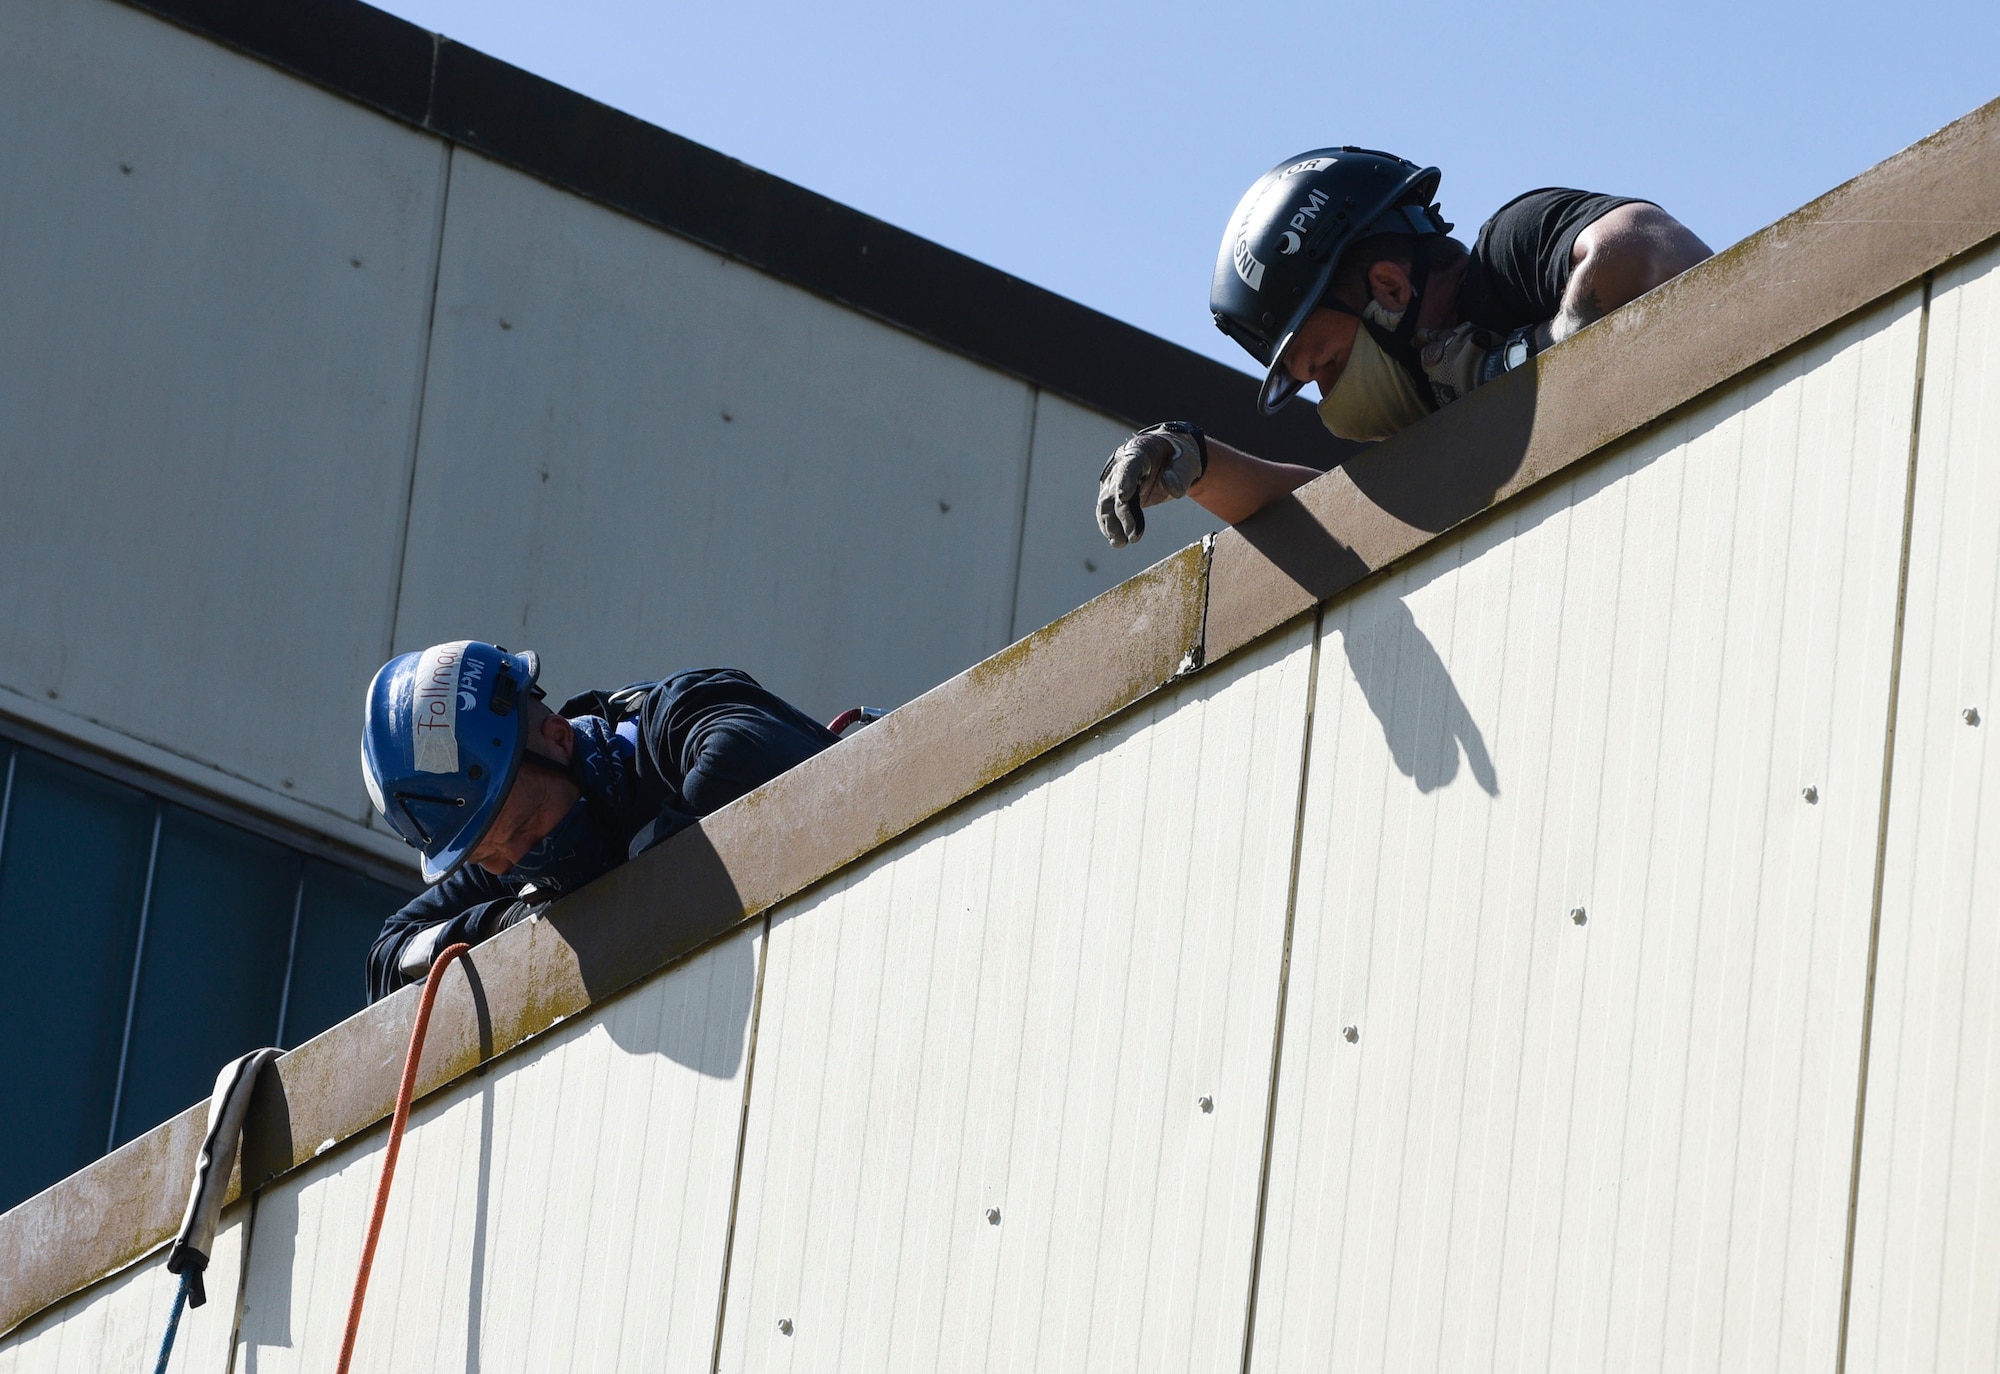 Marcel Follmann, 52nd Civil Engineer Squadron Fire and Emergency Services driver operator, left, and U.S Air Force Staff Sgt. Robert Welborn, 435th Construction and Training Squadron Fire Rescue and Contingency Training instructor, look at descending firefighters during a Rescue Technician course at Spangdahlem Air Base, Germany, June 23, 2020. Members from the 52 FES flight participate in this training to remain vigilant and ready to perform rescue operations in case of unexpected emergencies. (U.S. Air Force photo by Senior Airman Melody W. Howley)